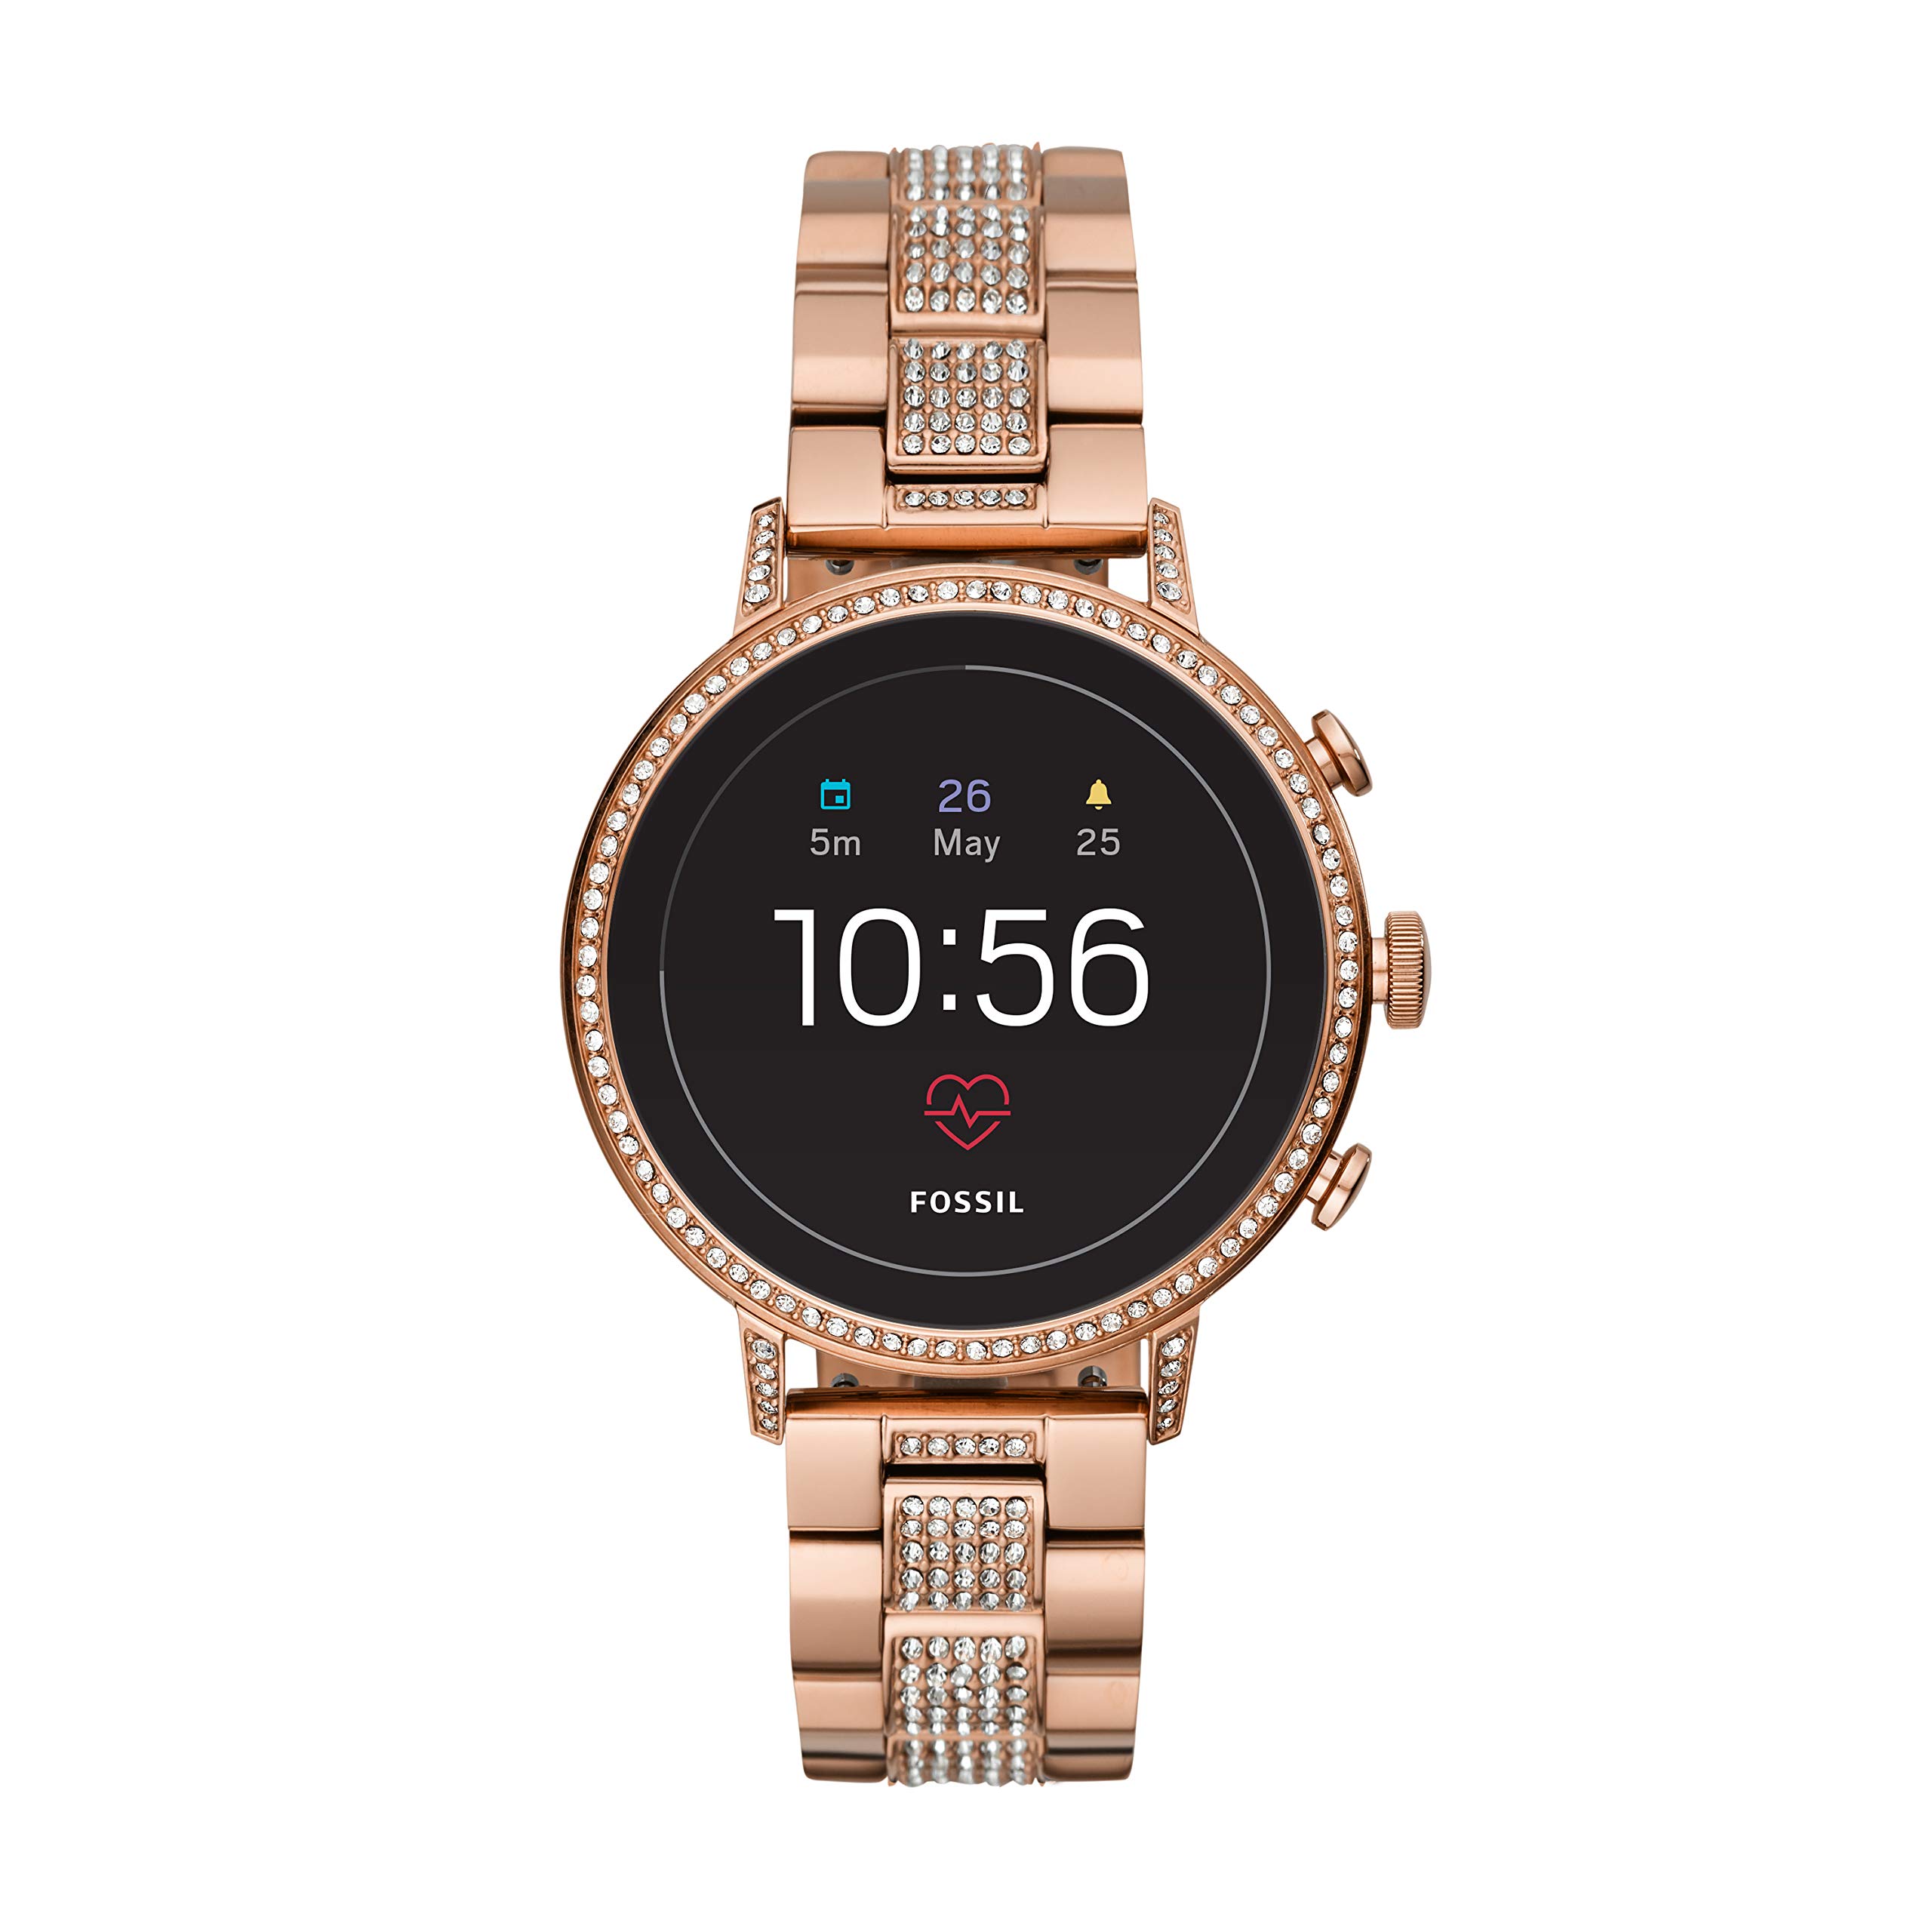 Fossil Women's Gen 4 Venture HR Stainless Steel Touchscreen Smartwatch with Heart Rate, GPS, NFC, and Smartphone Notifications